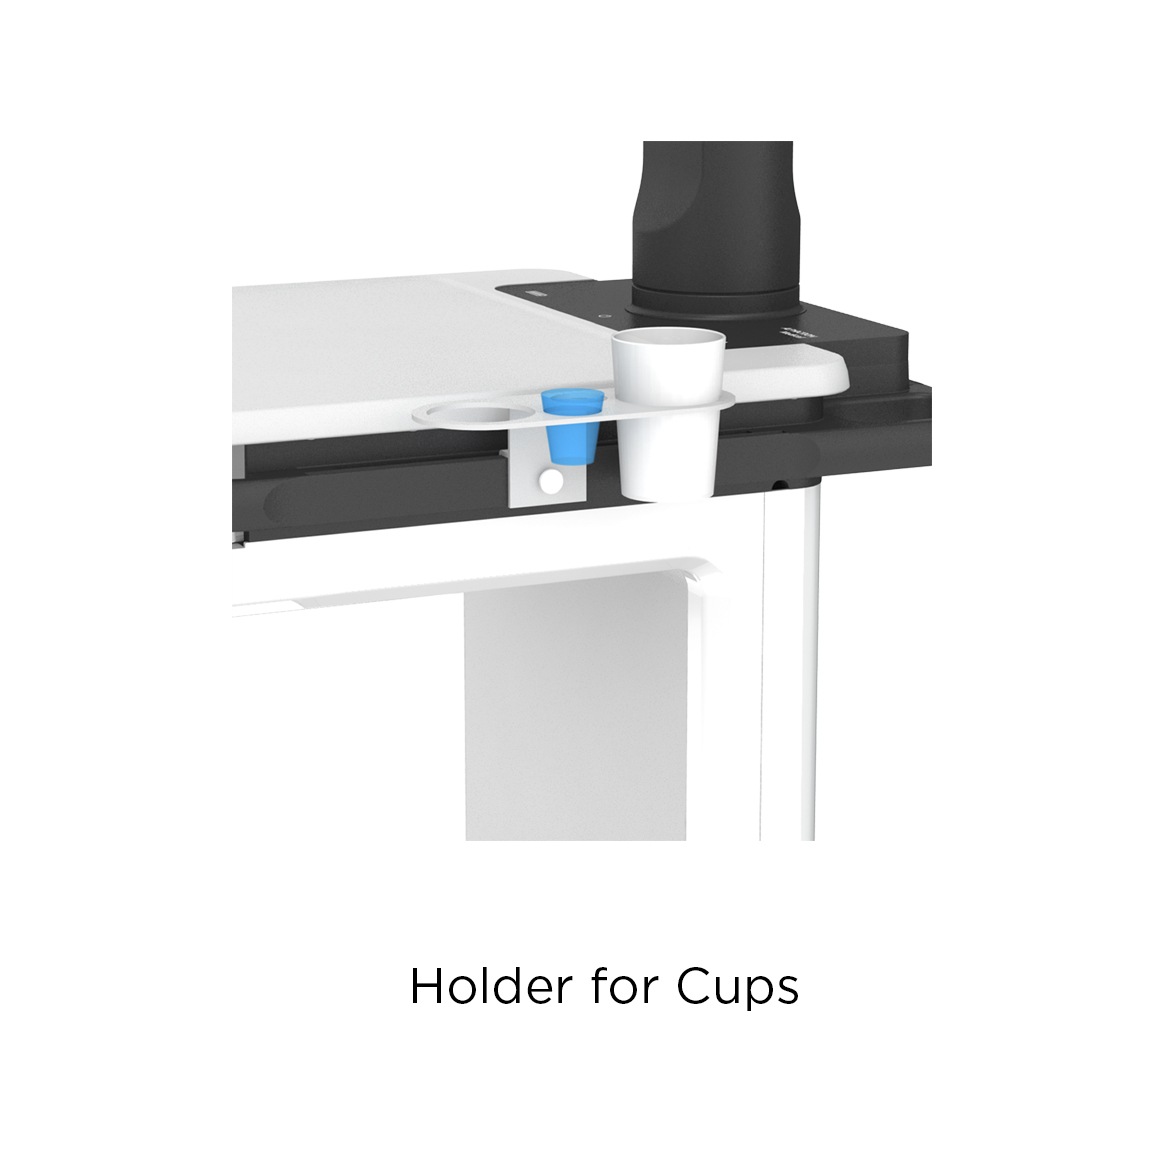 Holder for Cups